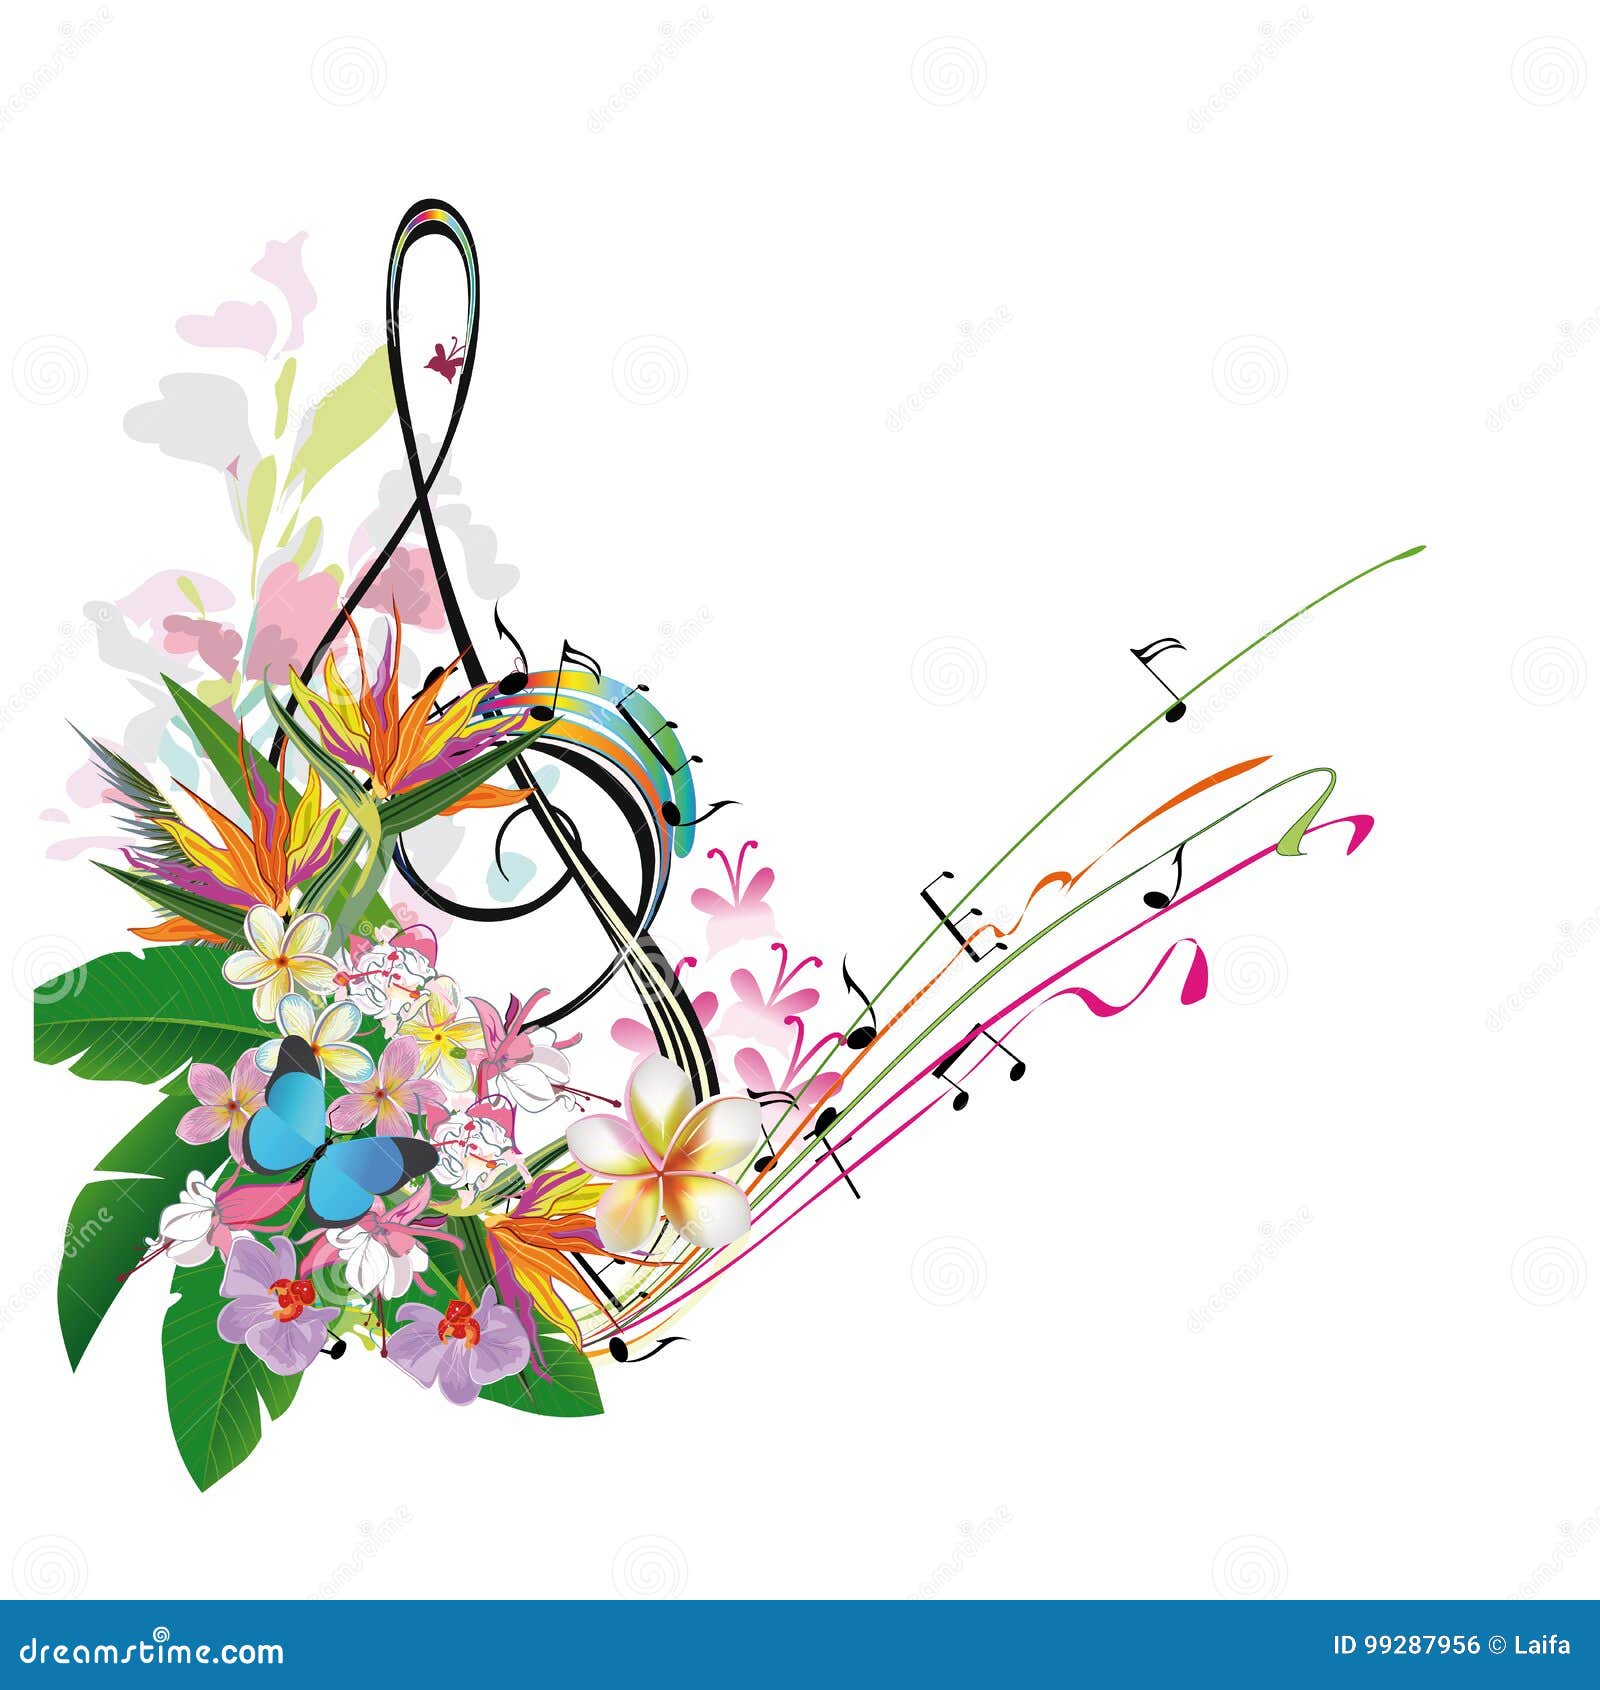 abstract treble clef decorated with leaves and flowers.